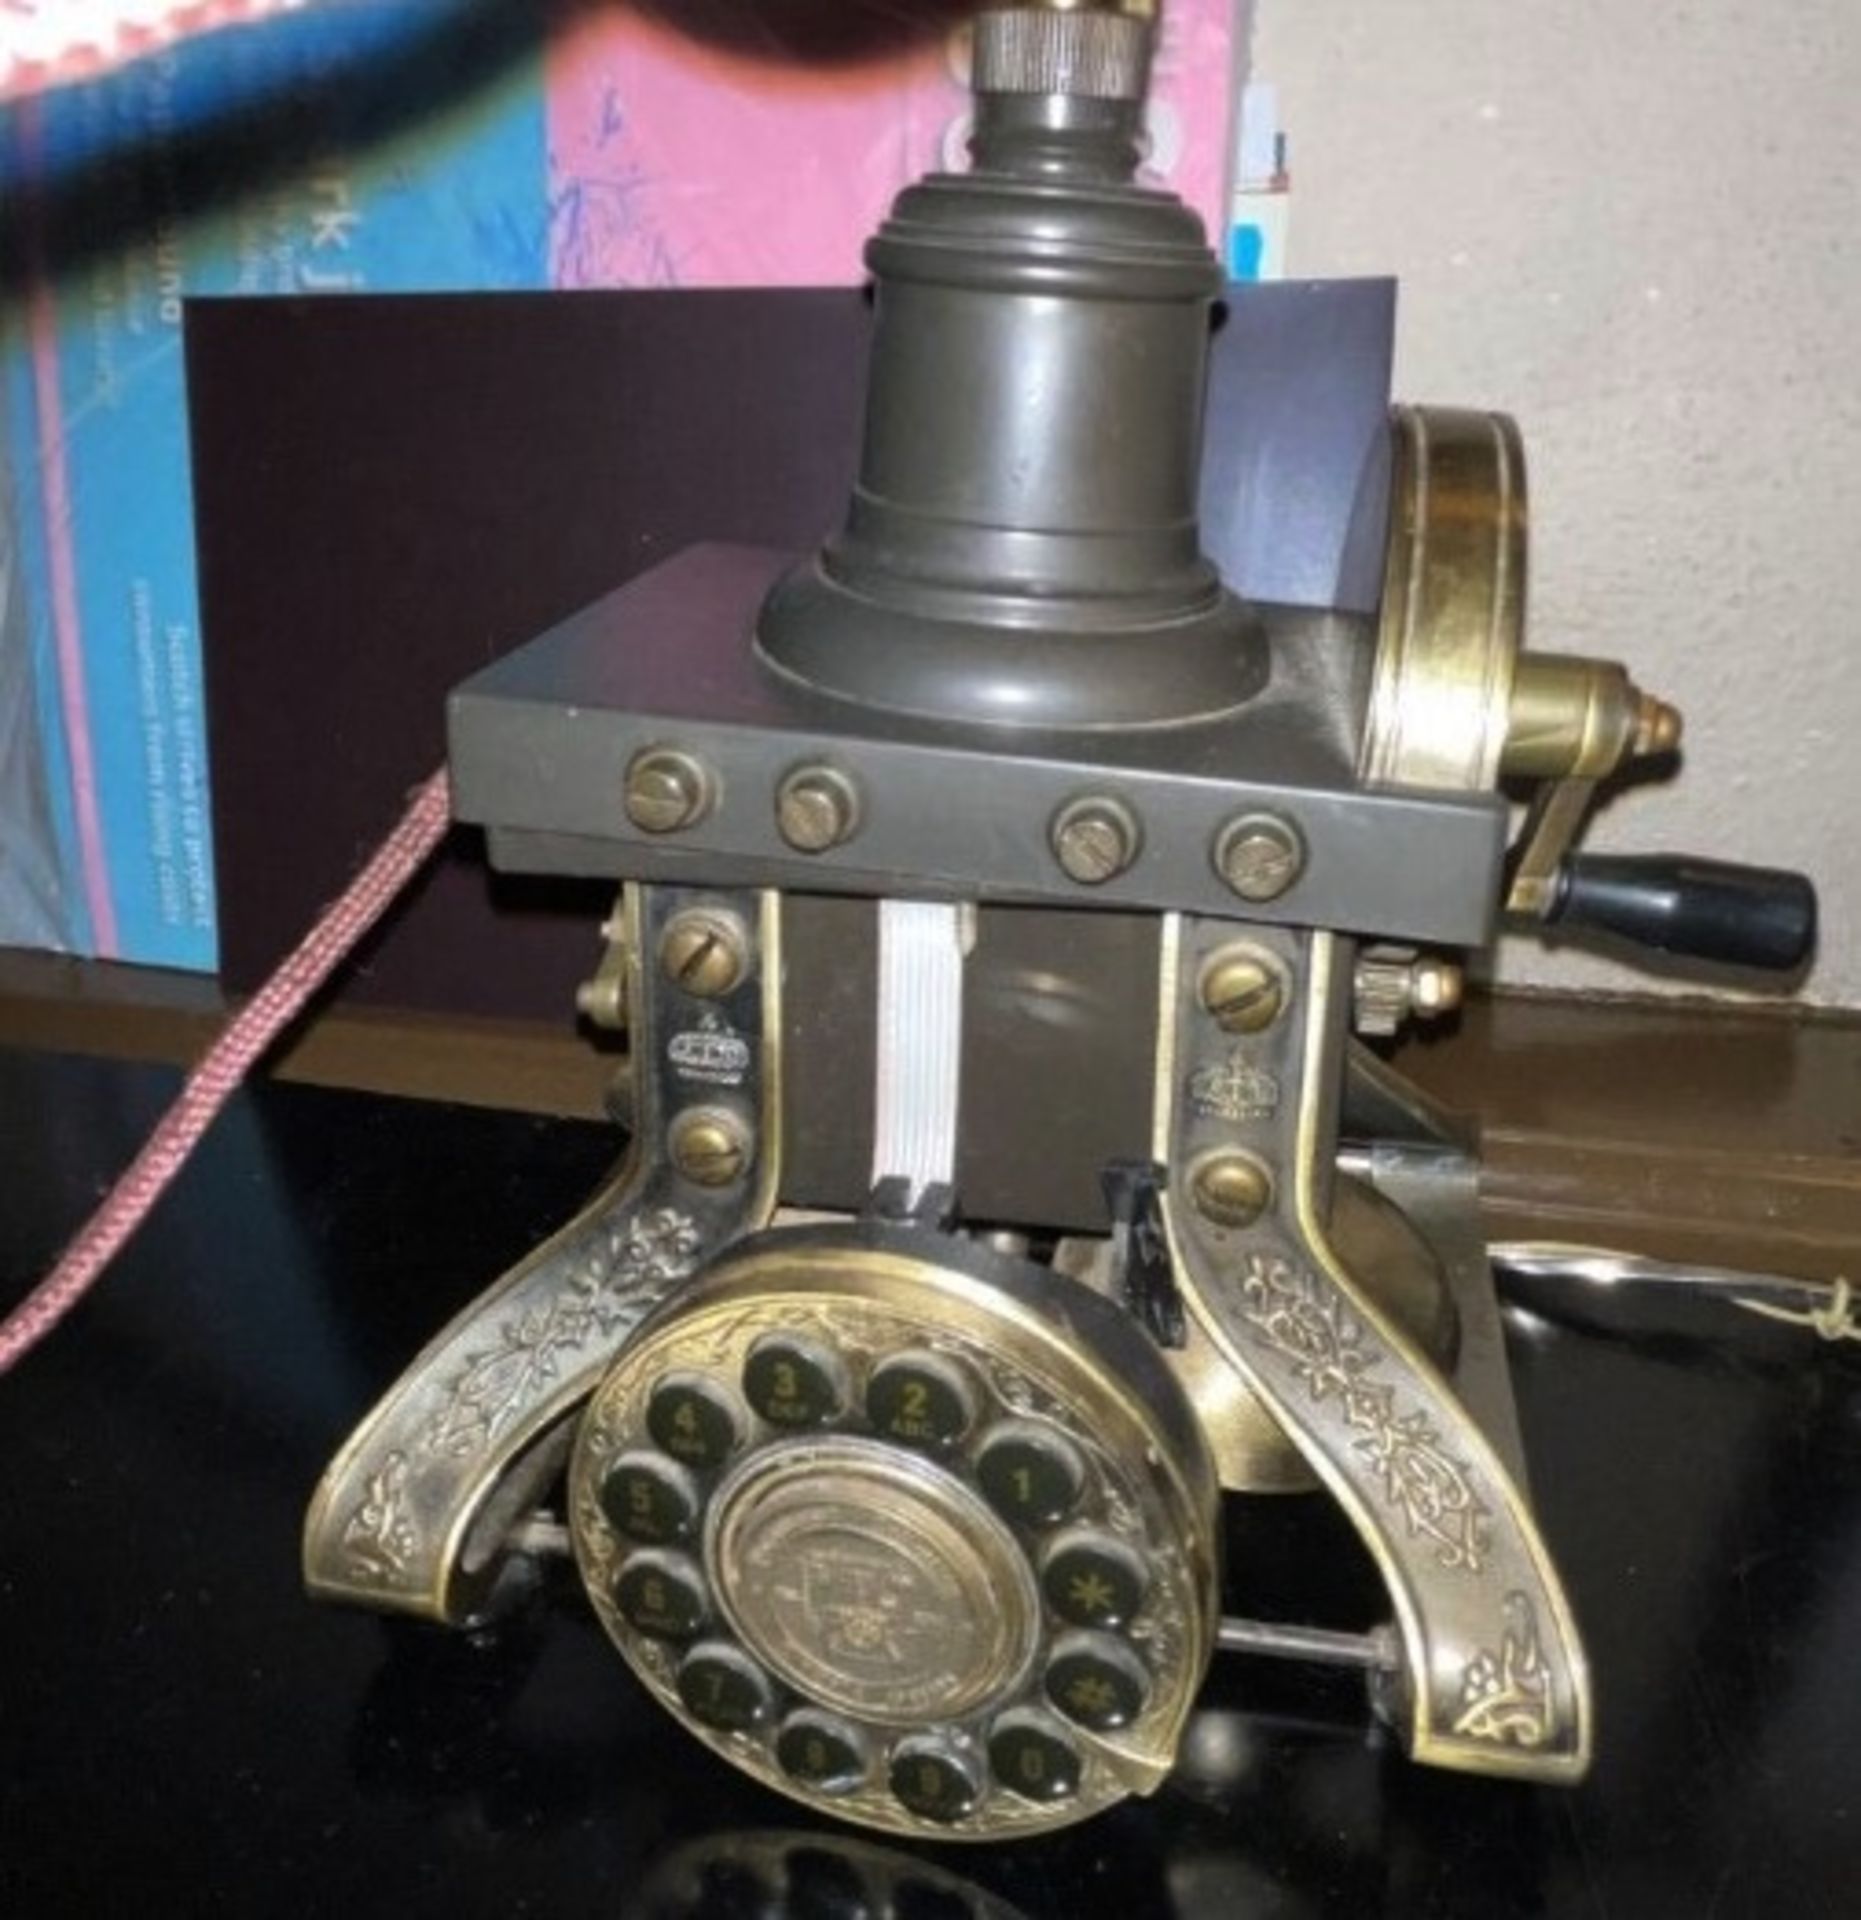 1 x Vintage Style Metal Candlestick Telephone with Line Cord - CL909 - Location: London, W1U This - Image 6 of 6